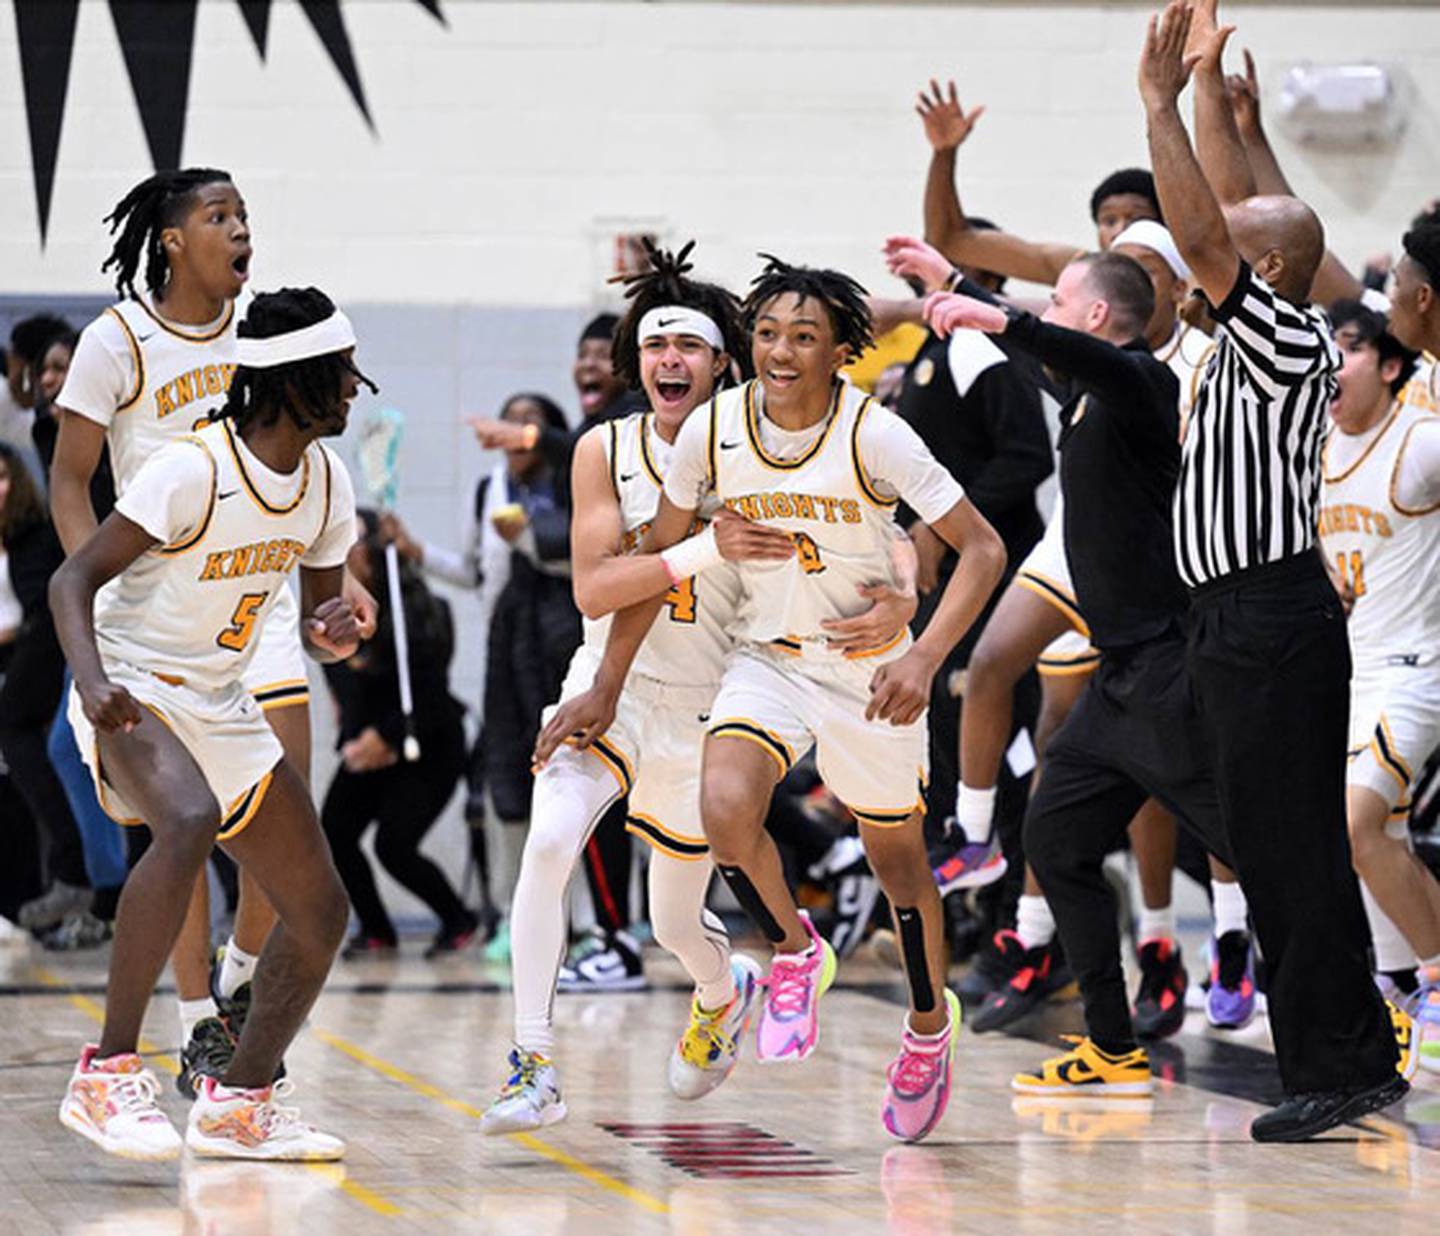 Parkville's Josiah Legree (far right) begins to celebrate after his game-winning 3-pointer in Thursday's Class 4A North Region I boys basketball championship game. His shot as time expired in overtime lifted the No. 5 Knights to a 67-66 victory over Dulaney for their third consecutive region title.